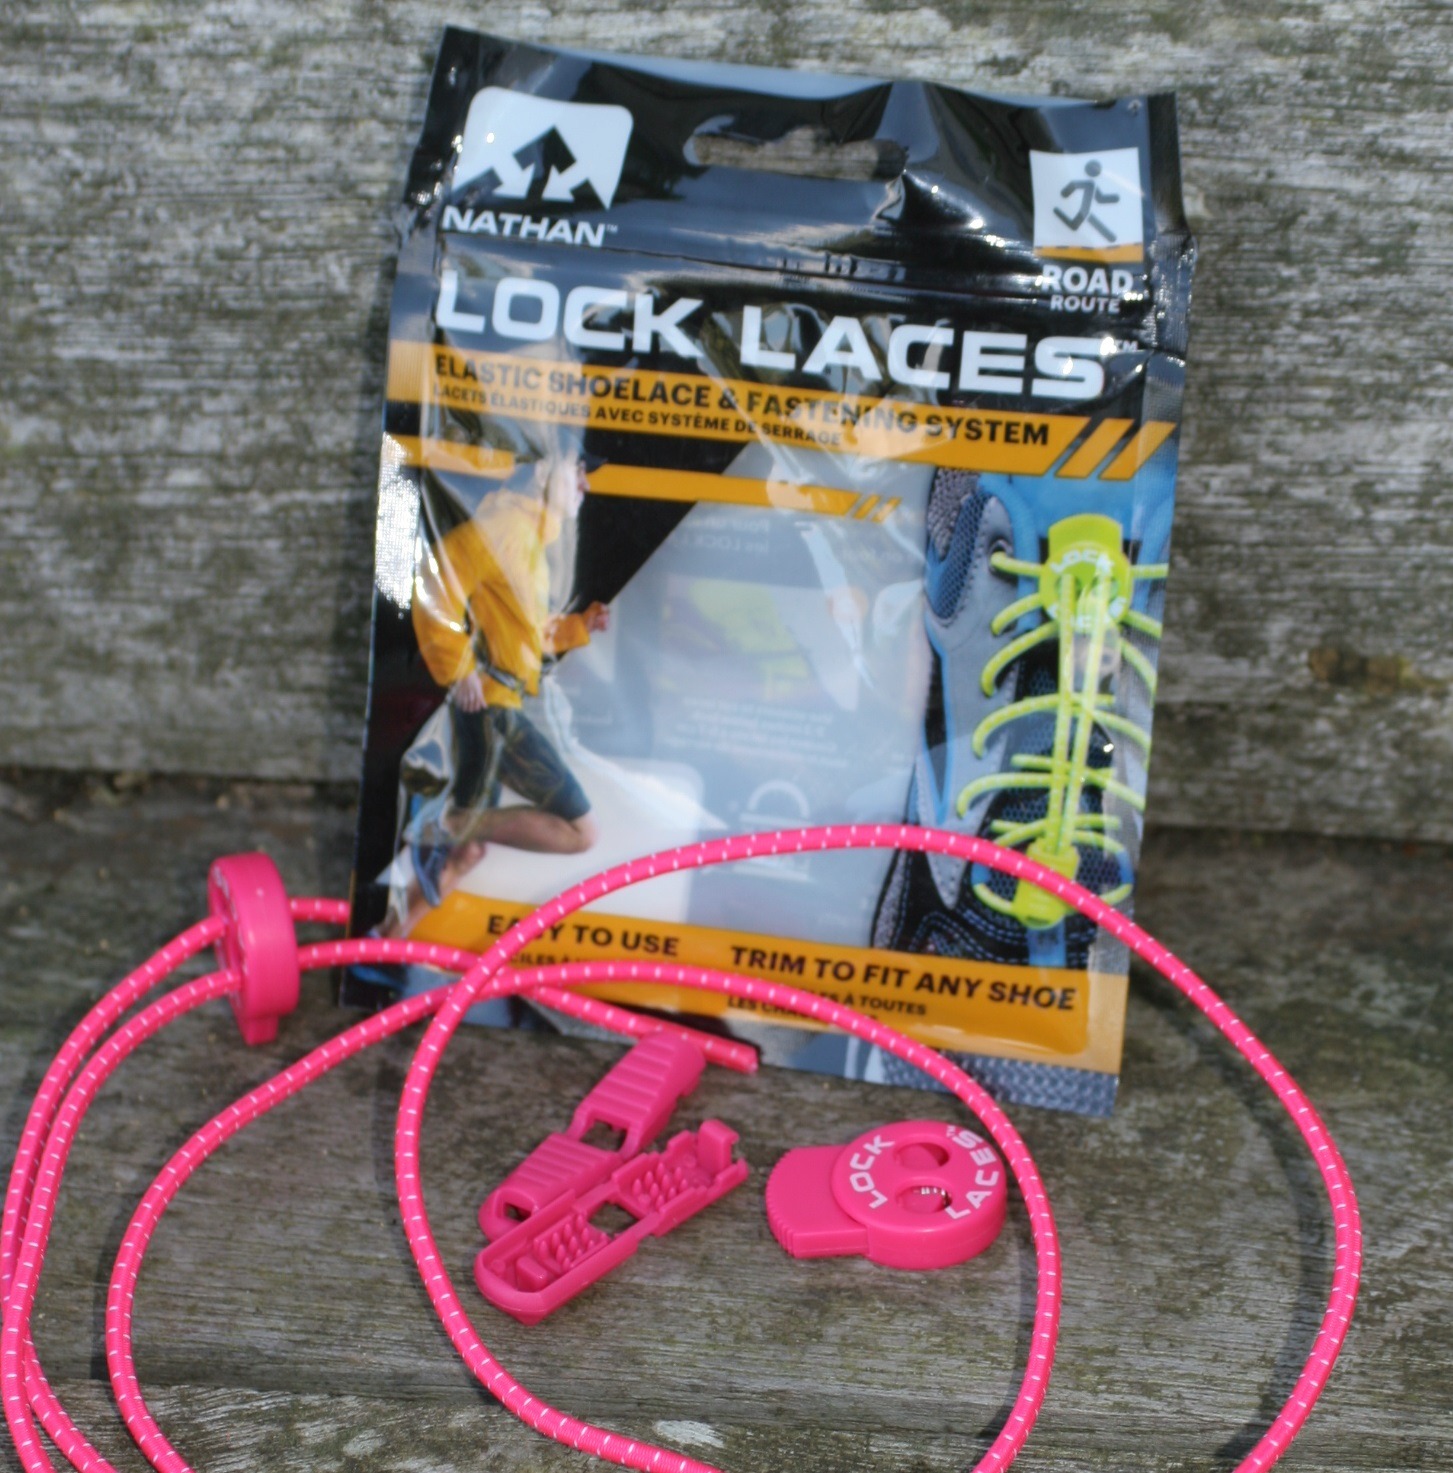 Nathan Lock Laces Review